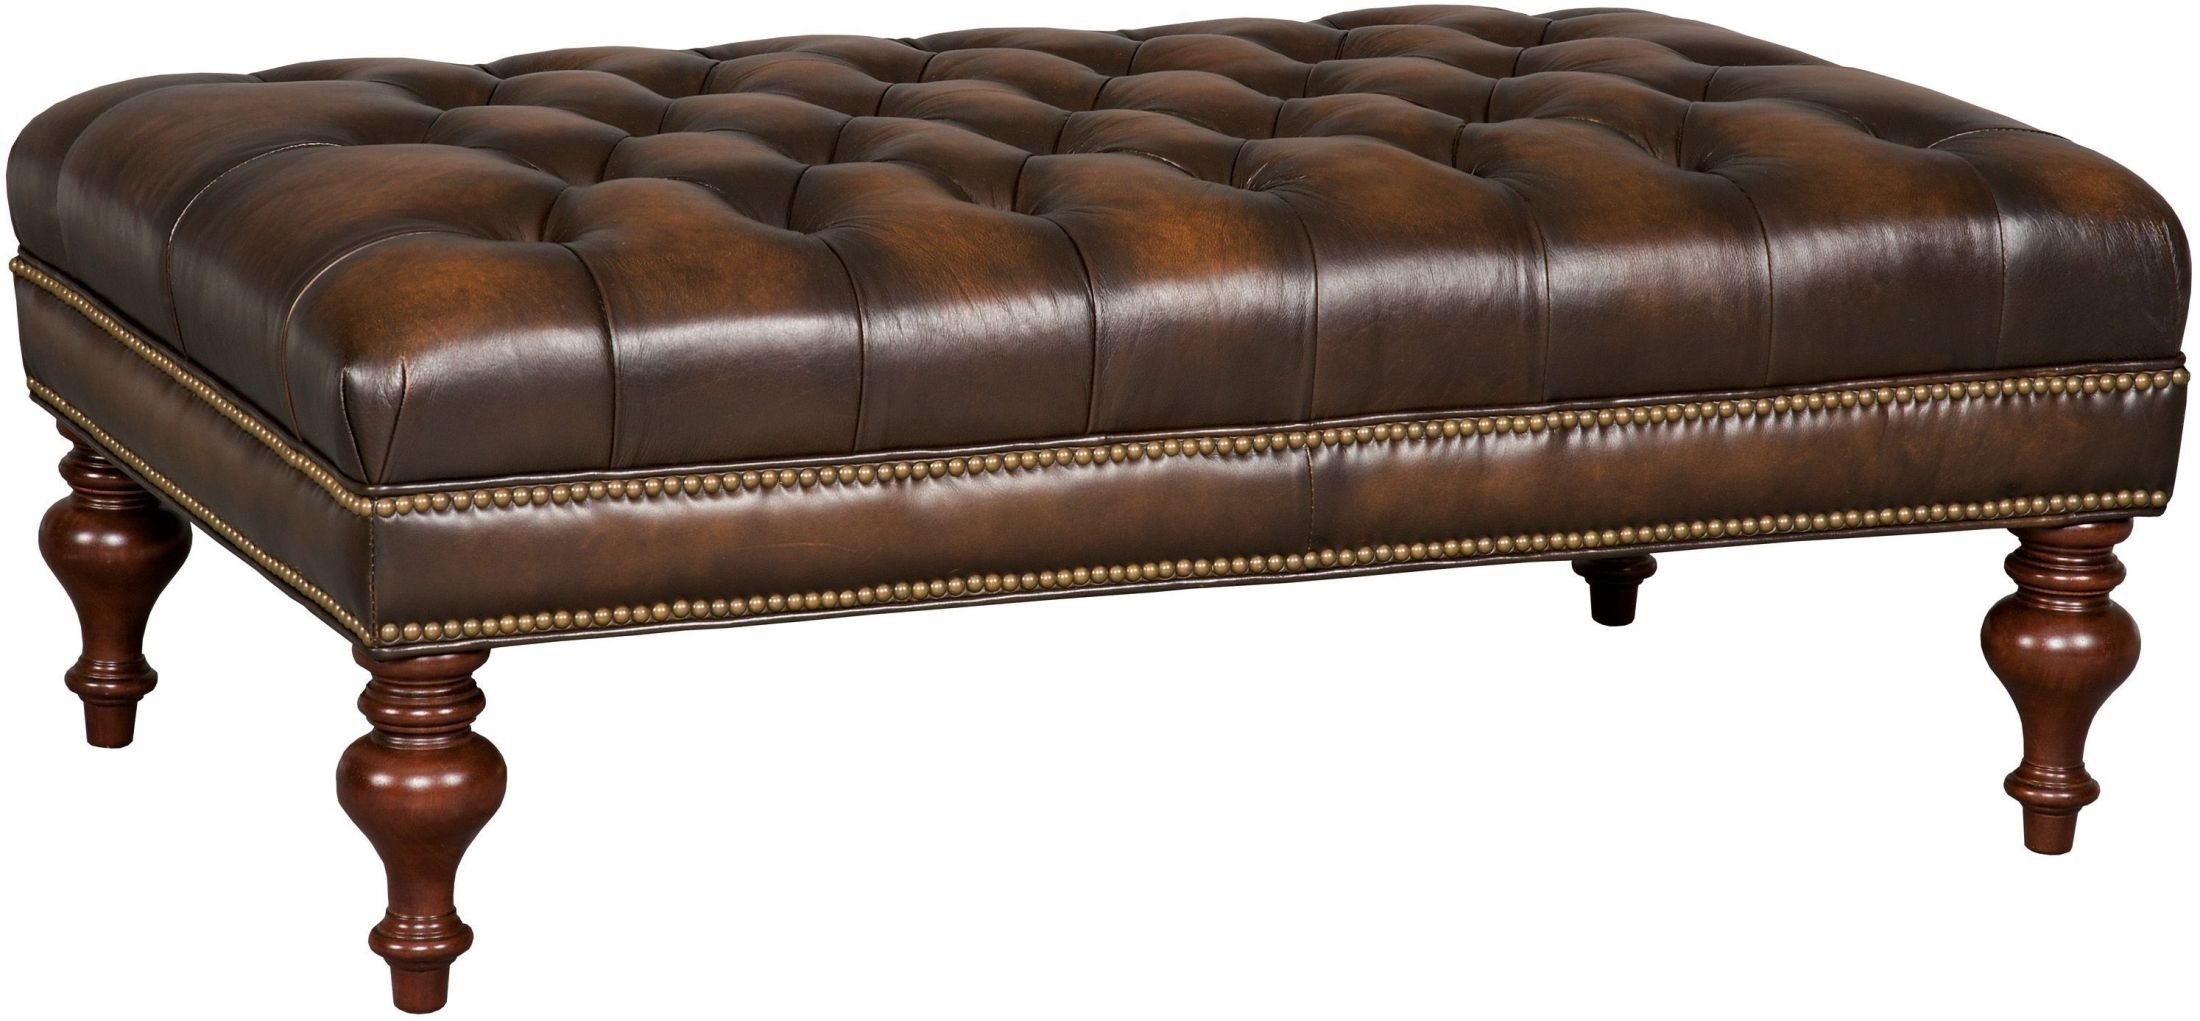 Kingley Brown Tufted Cocktail Leather Ottoman From Hooker | Coleman Regarding Tufted Ottomans (View 11 of 20)